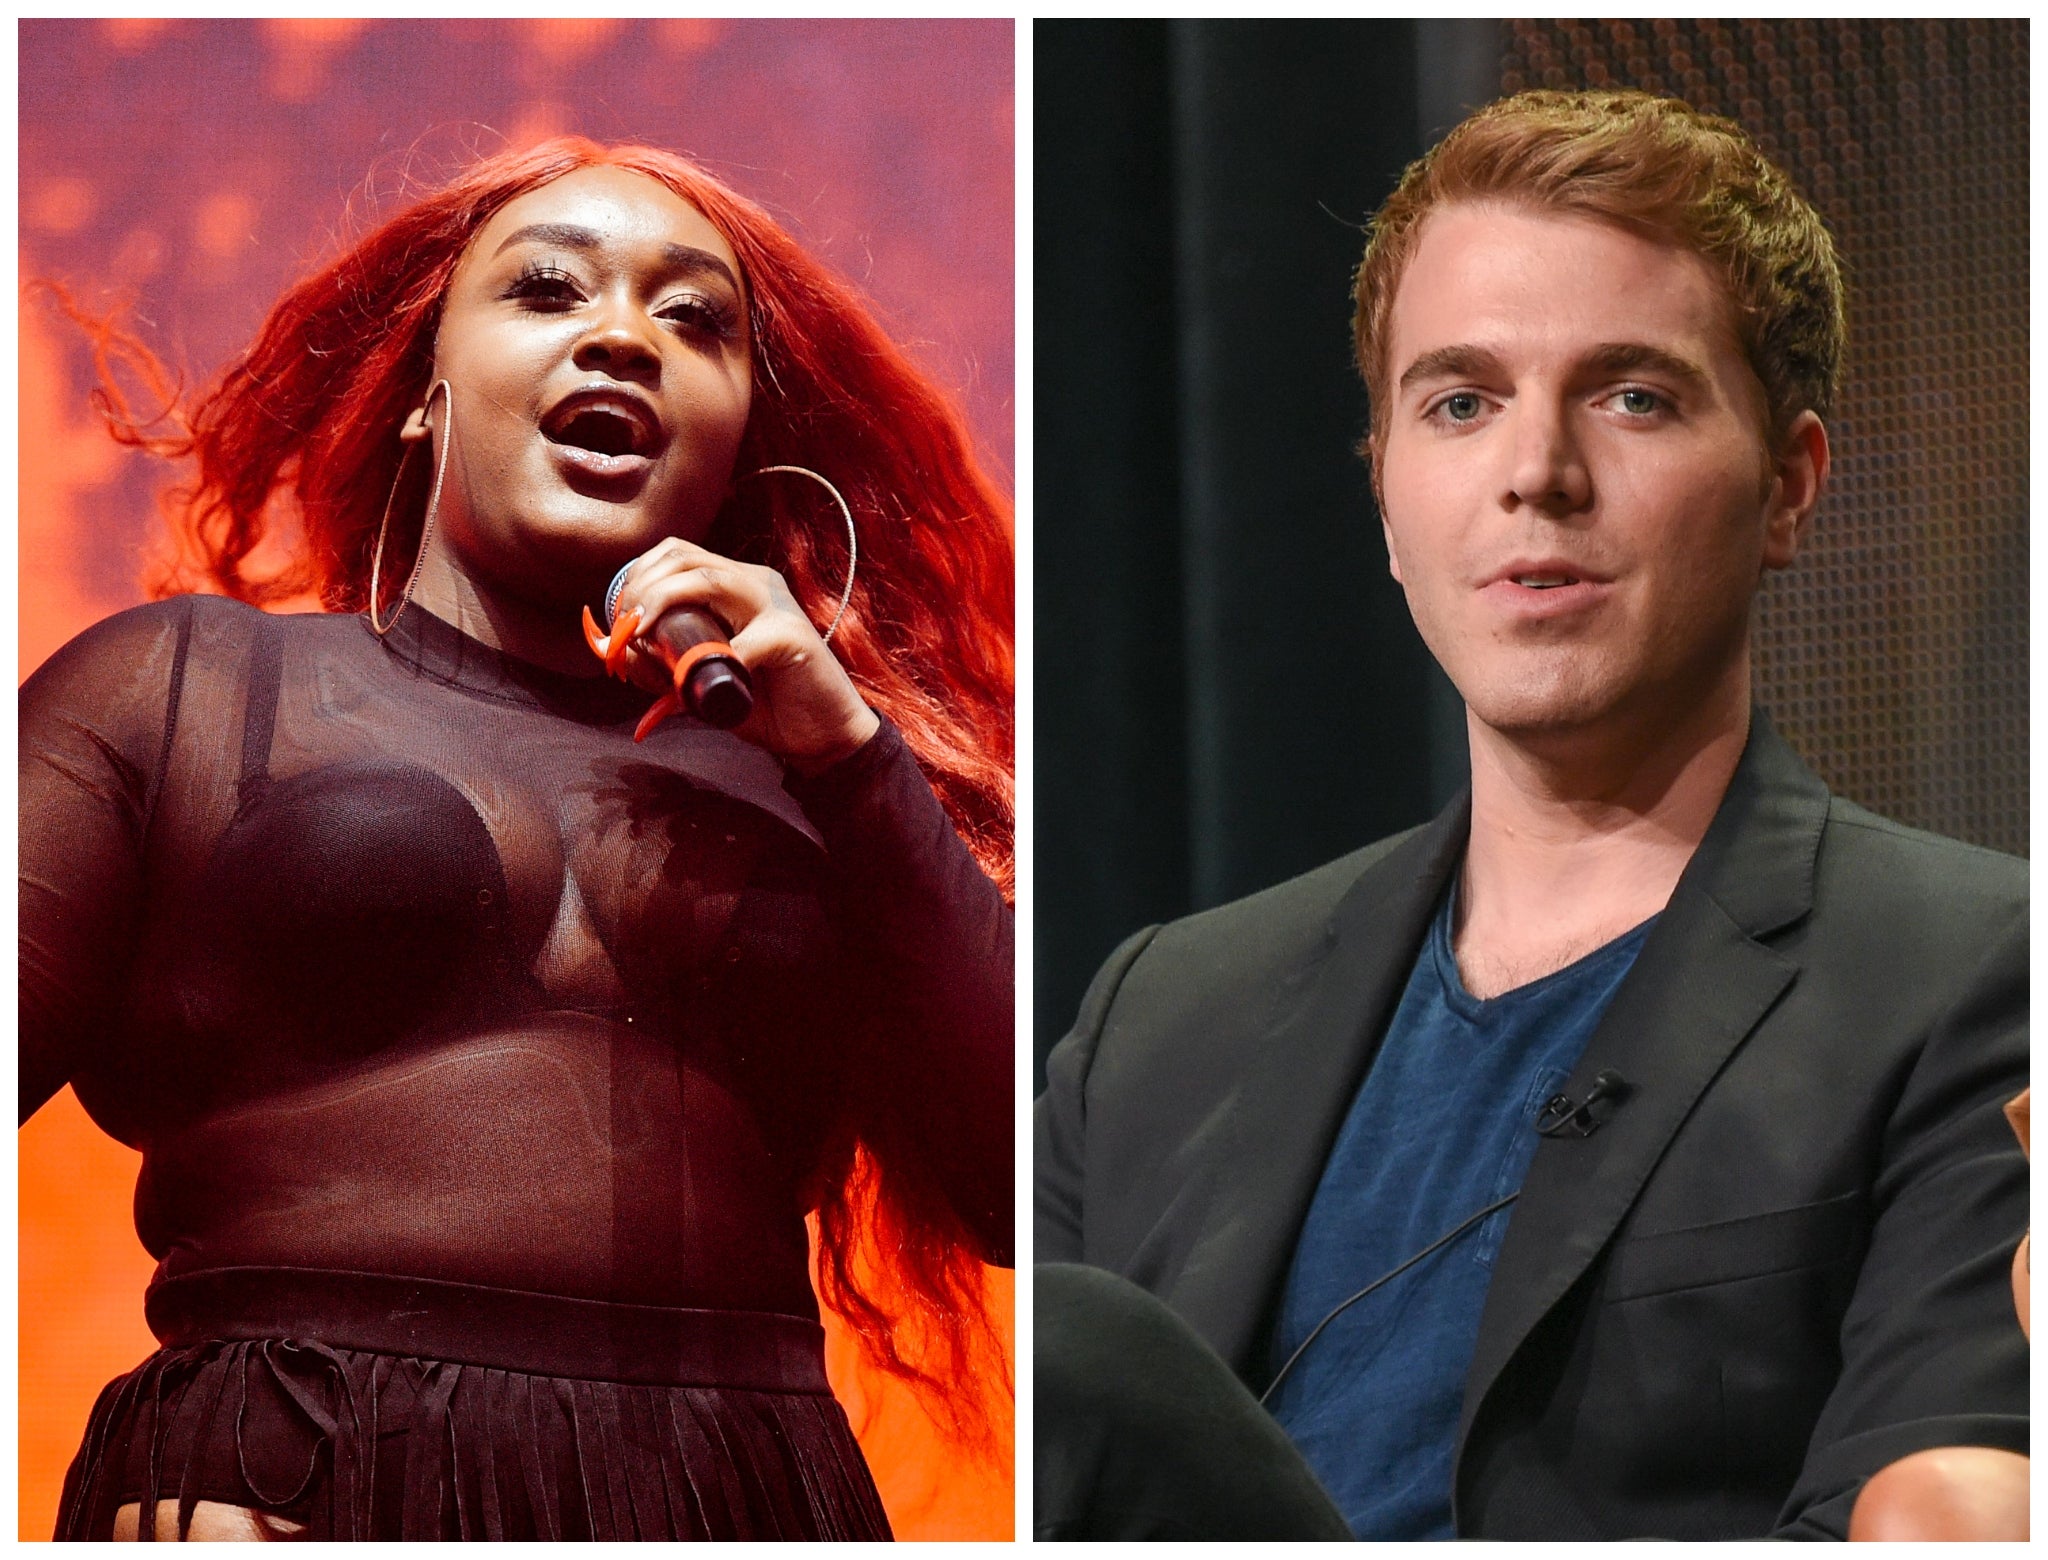 Rapper CupcakKe severs ties with Shane Dawson over 'sick' Willow Smith video: 'You have some growing to do'